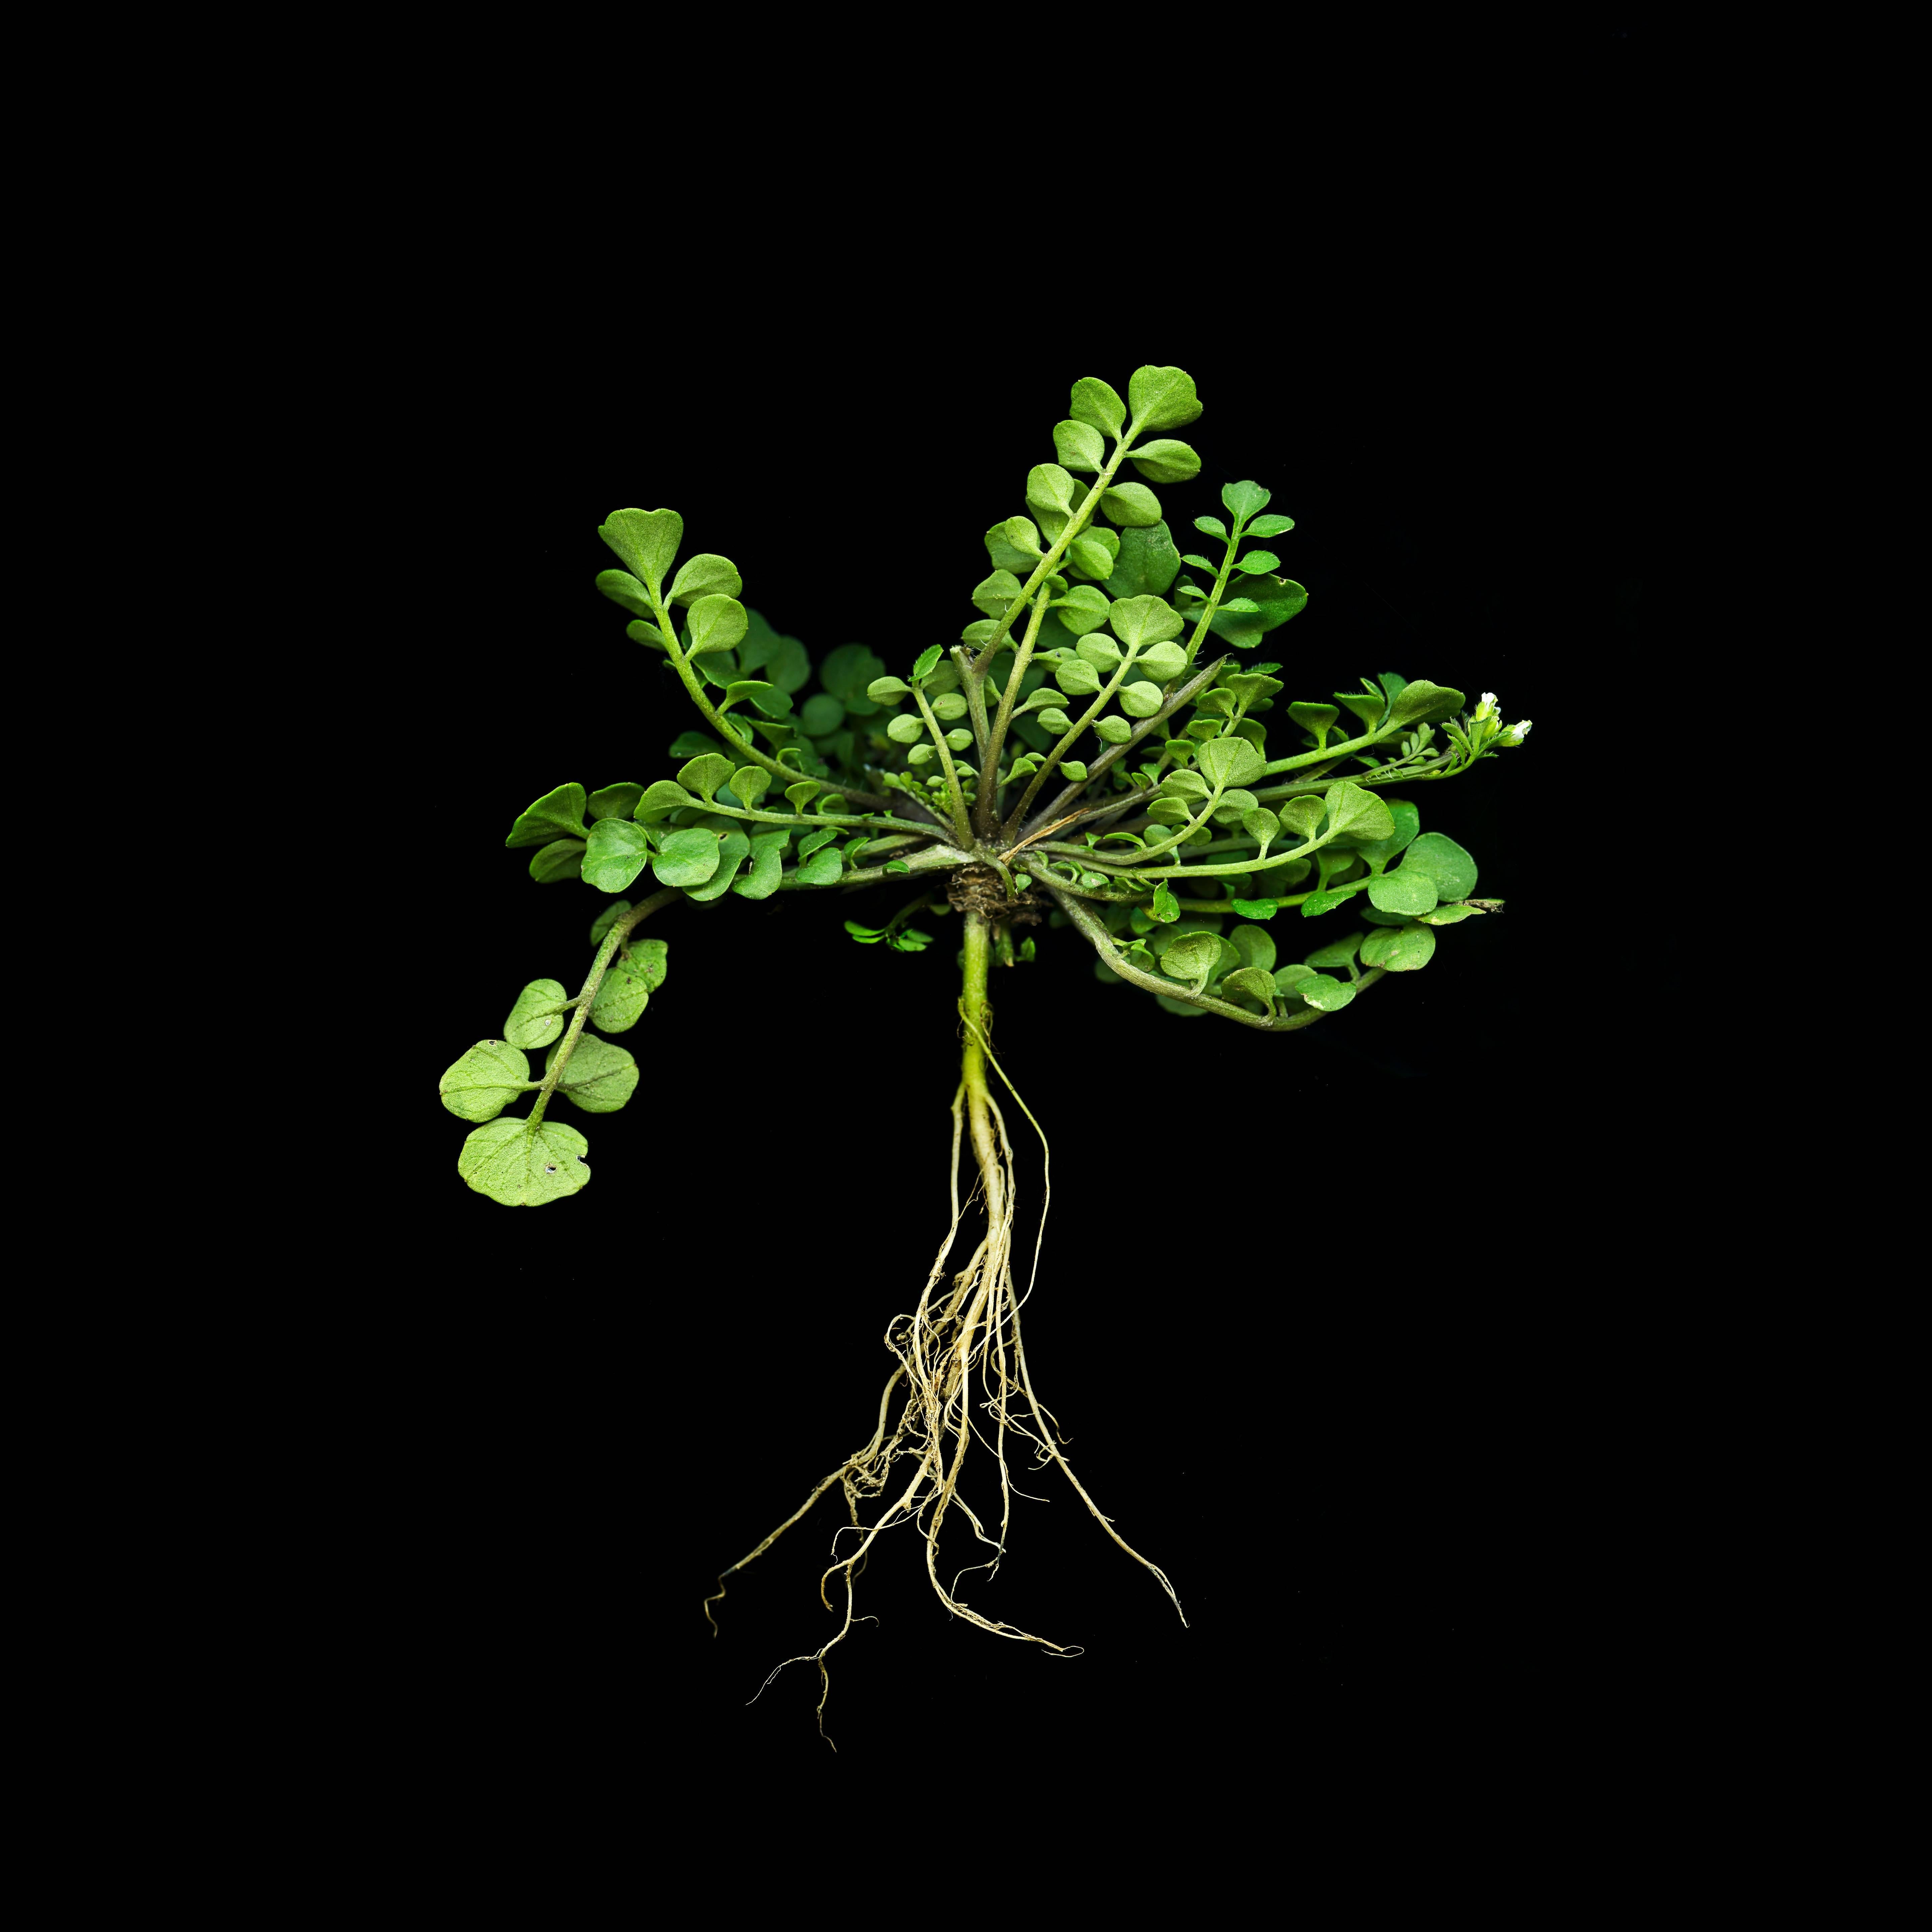 Jerry Freedner Still-Life Photograph - Weed II (Modern Still Life Photograph of Green Plant on Black Background)